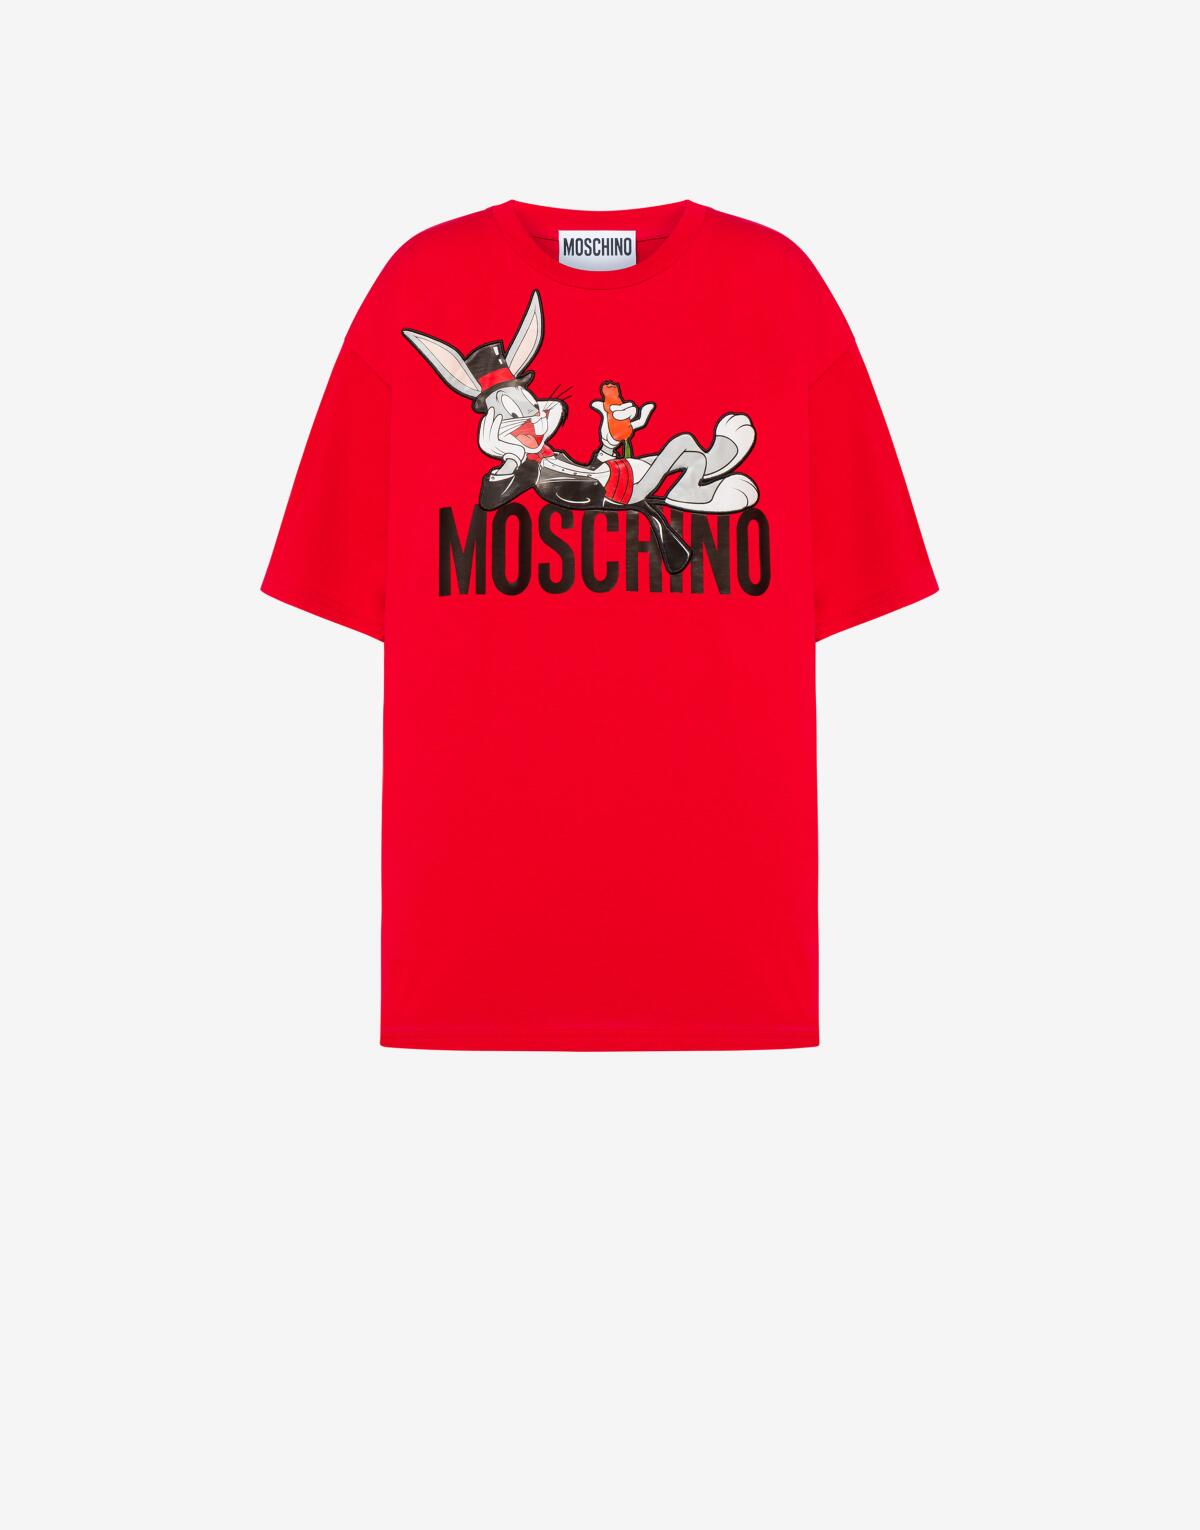 Red T-shirt with Bugs Bunny wearing a top hat and reclining on the word Moschino